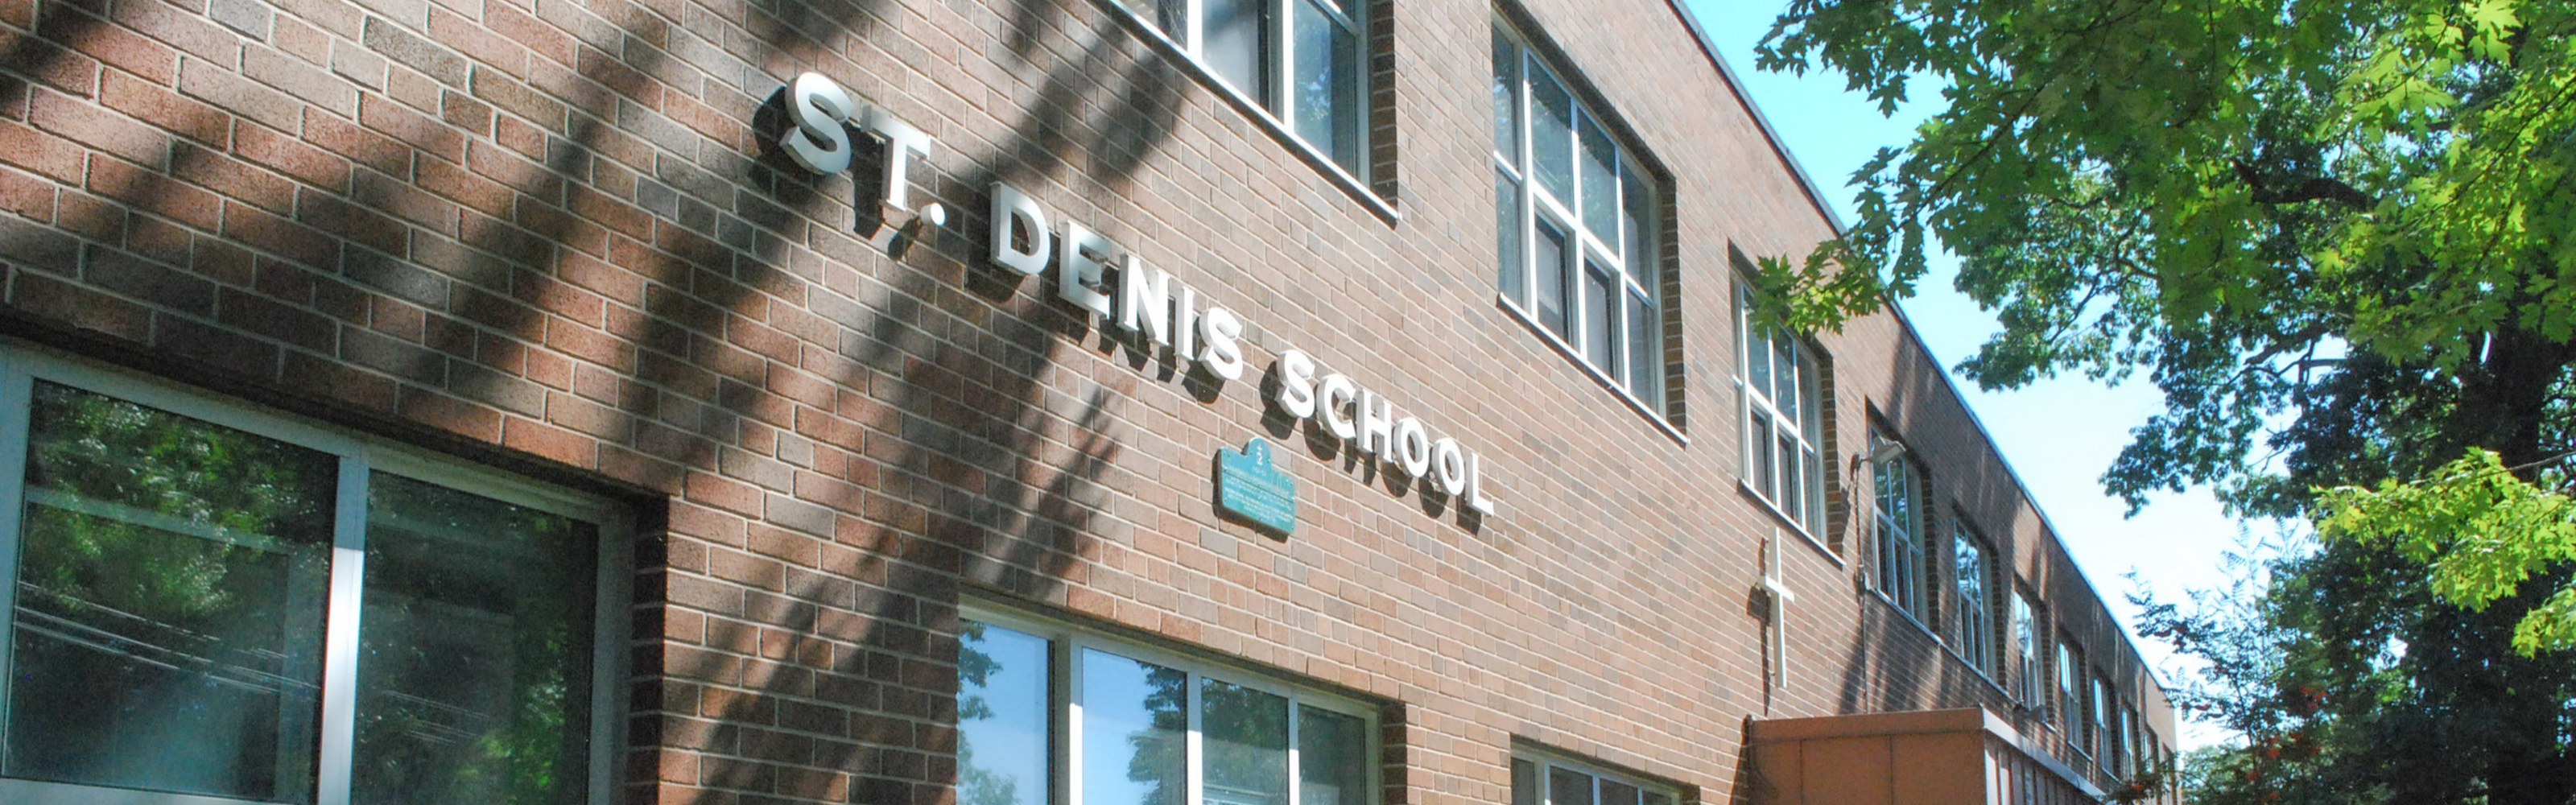 The front of the St. Denis Catholic School building.